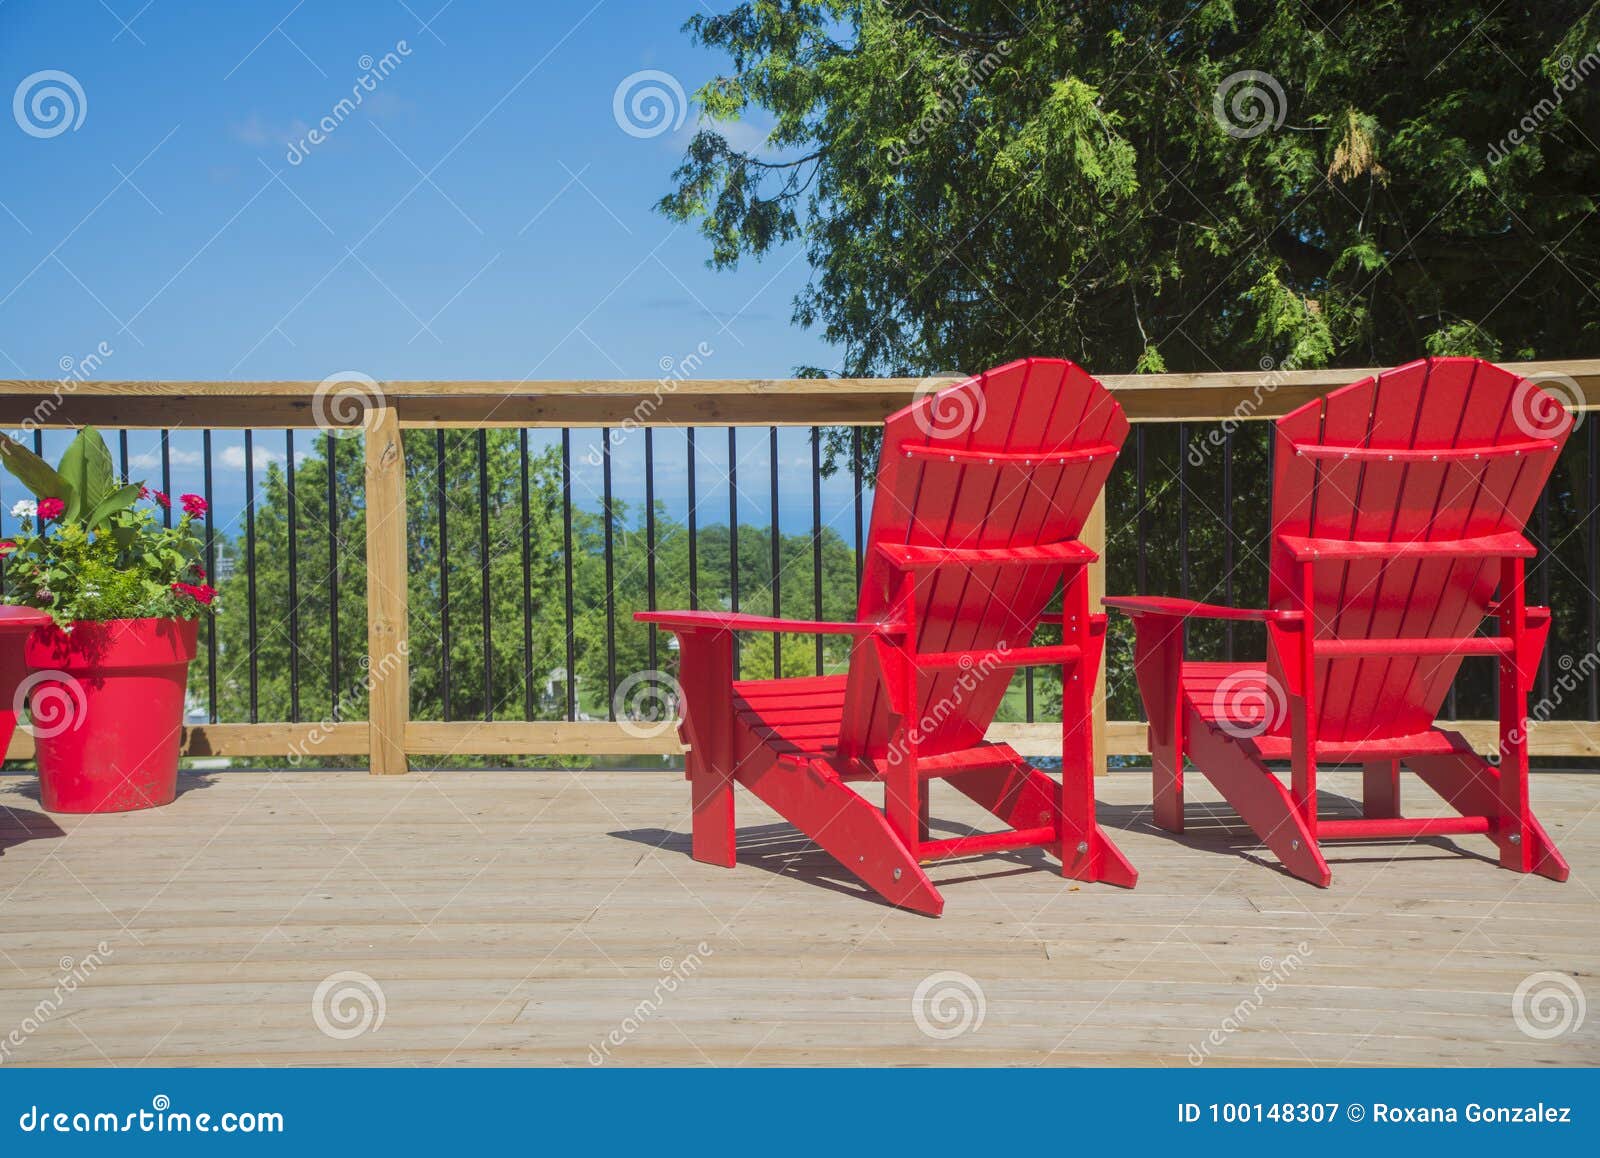 view of typical canadian red muskoka chairs on a wood deck